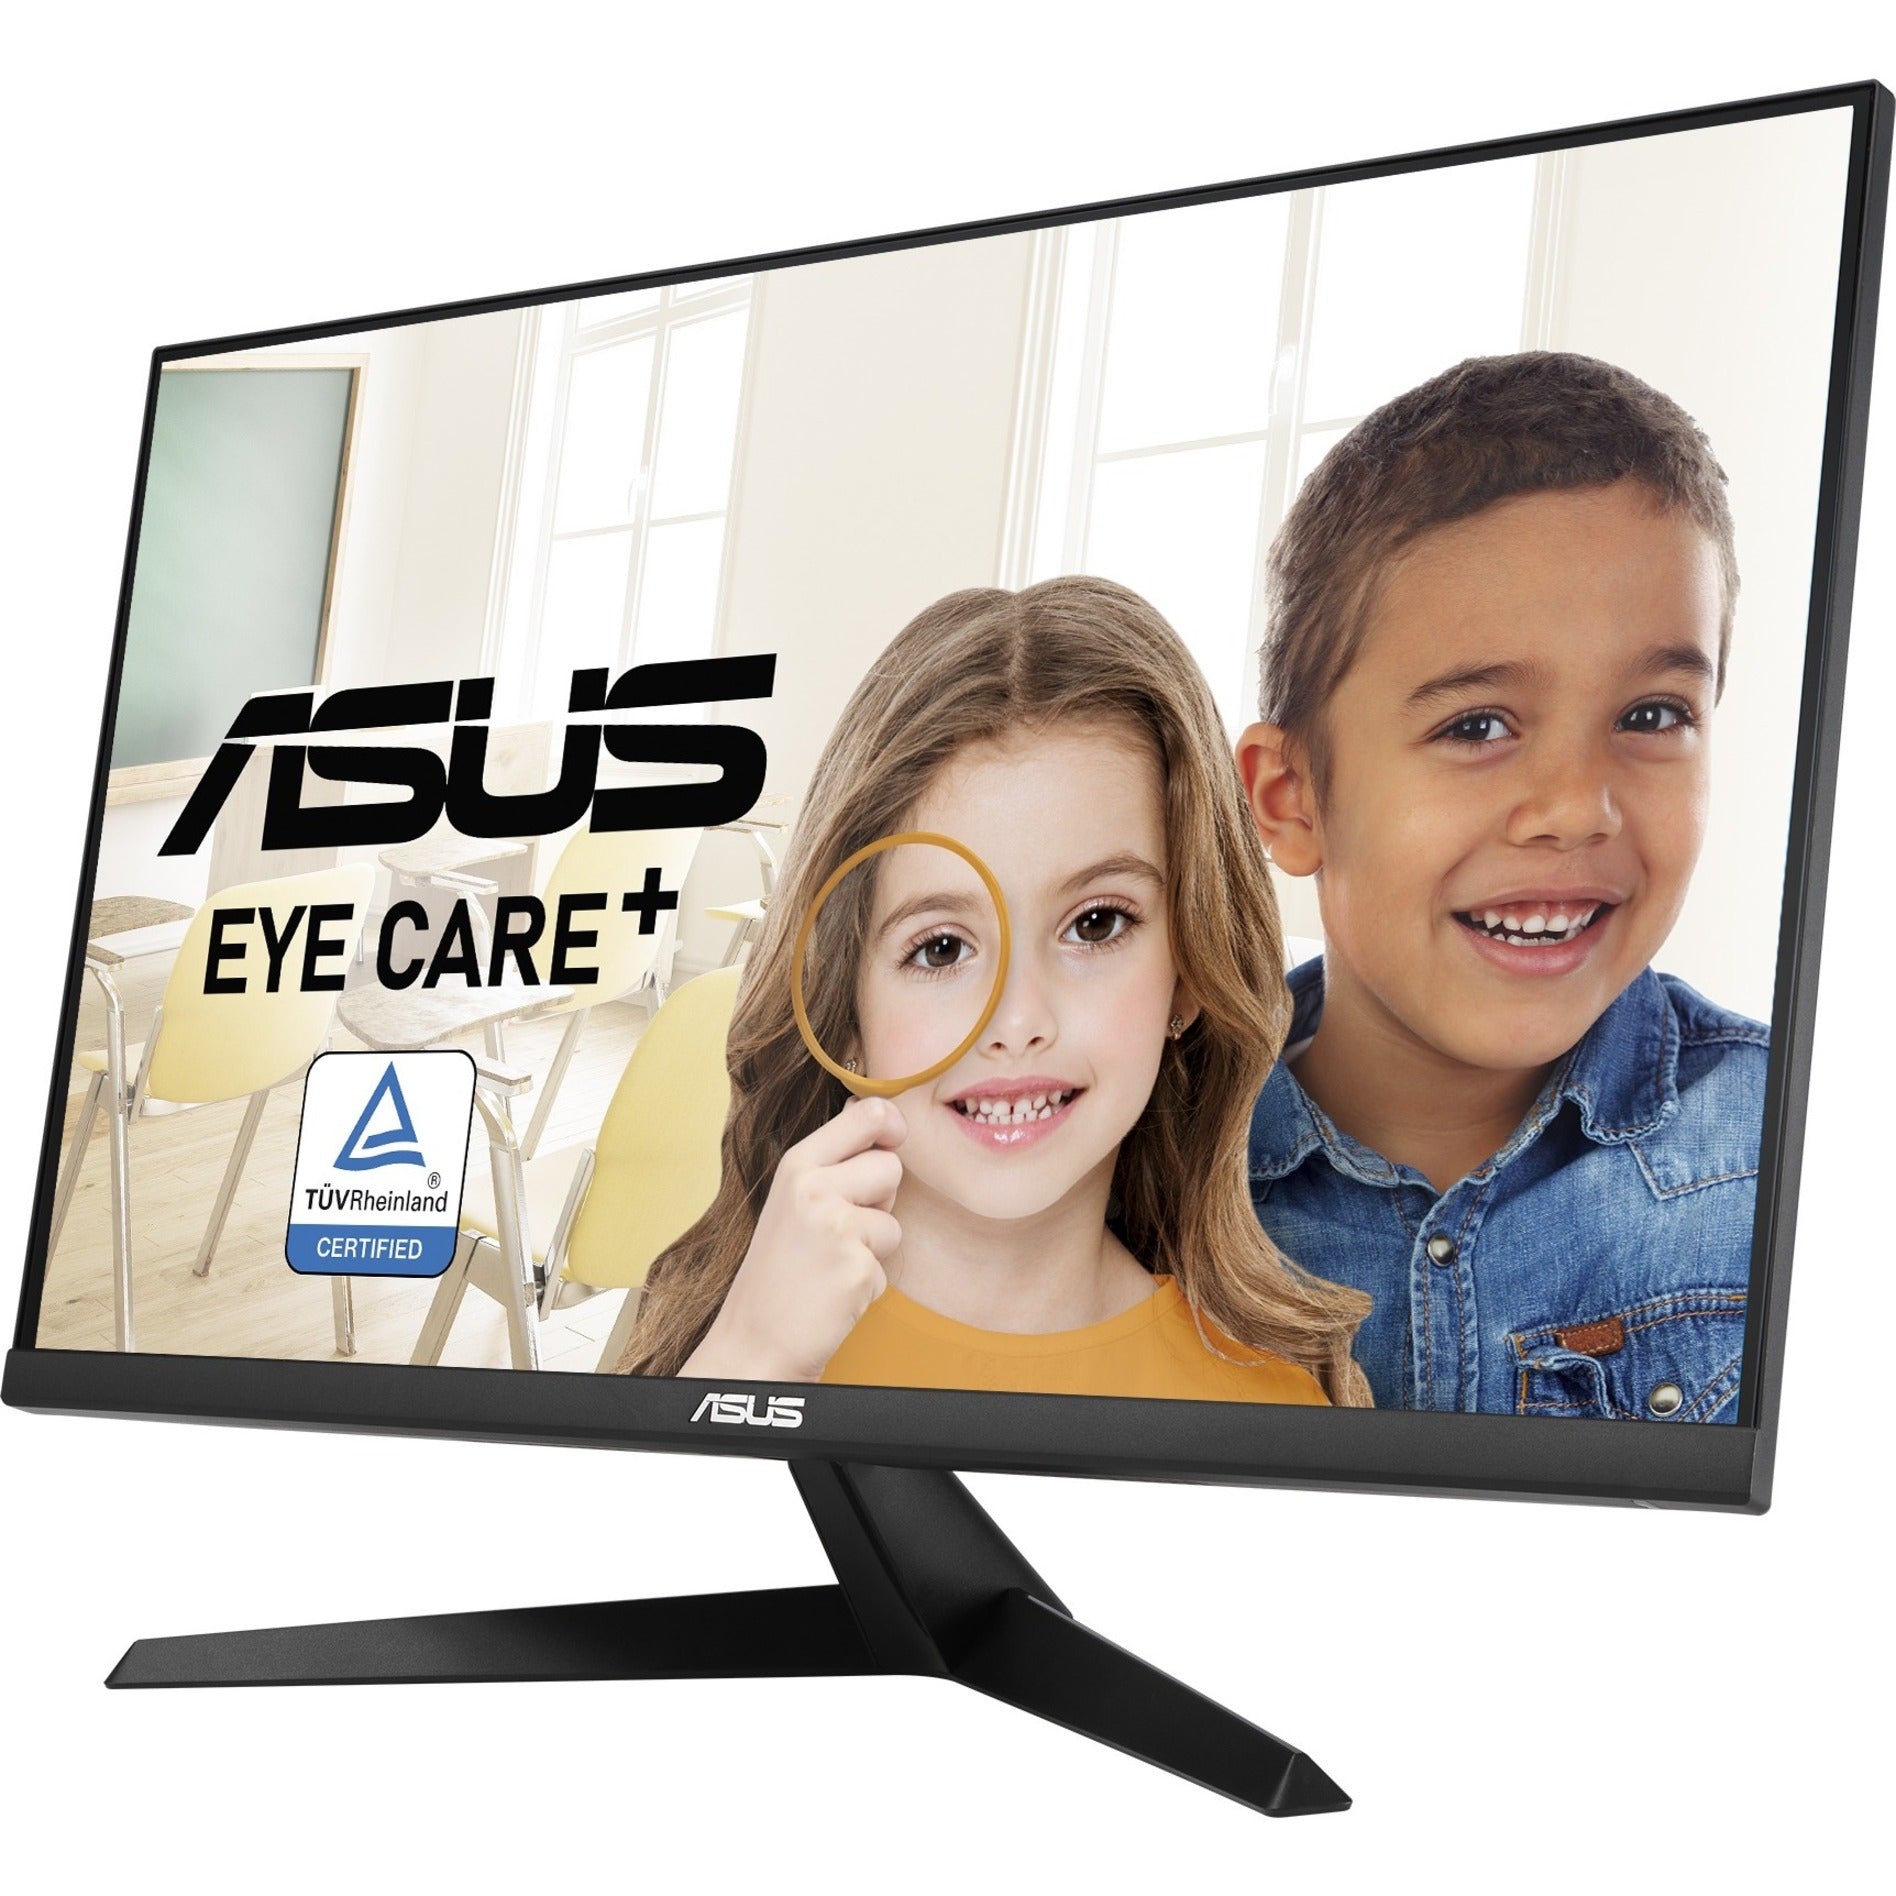 Asus VY279HE Gaming LCD Monitor, 27" Full HD, Adaptive Sync/FreeSync, Anti-glare, Low Blue Light